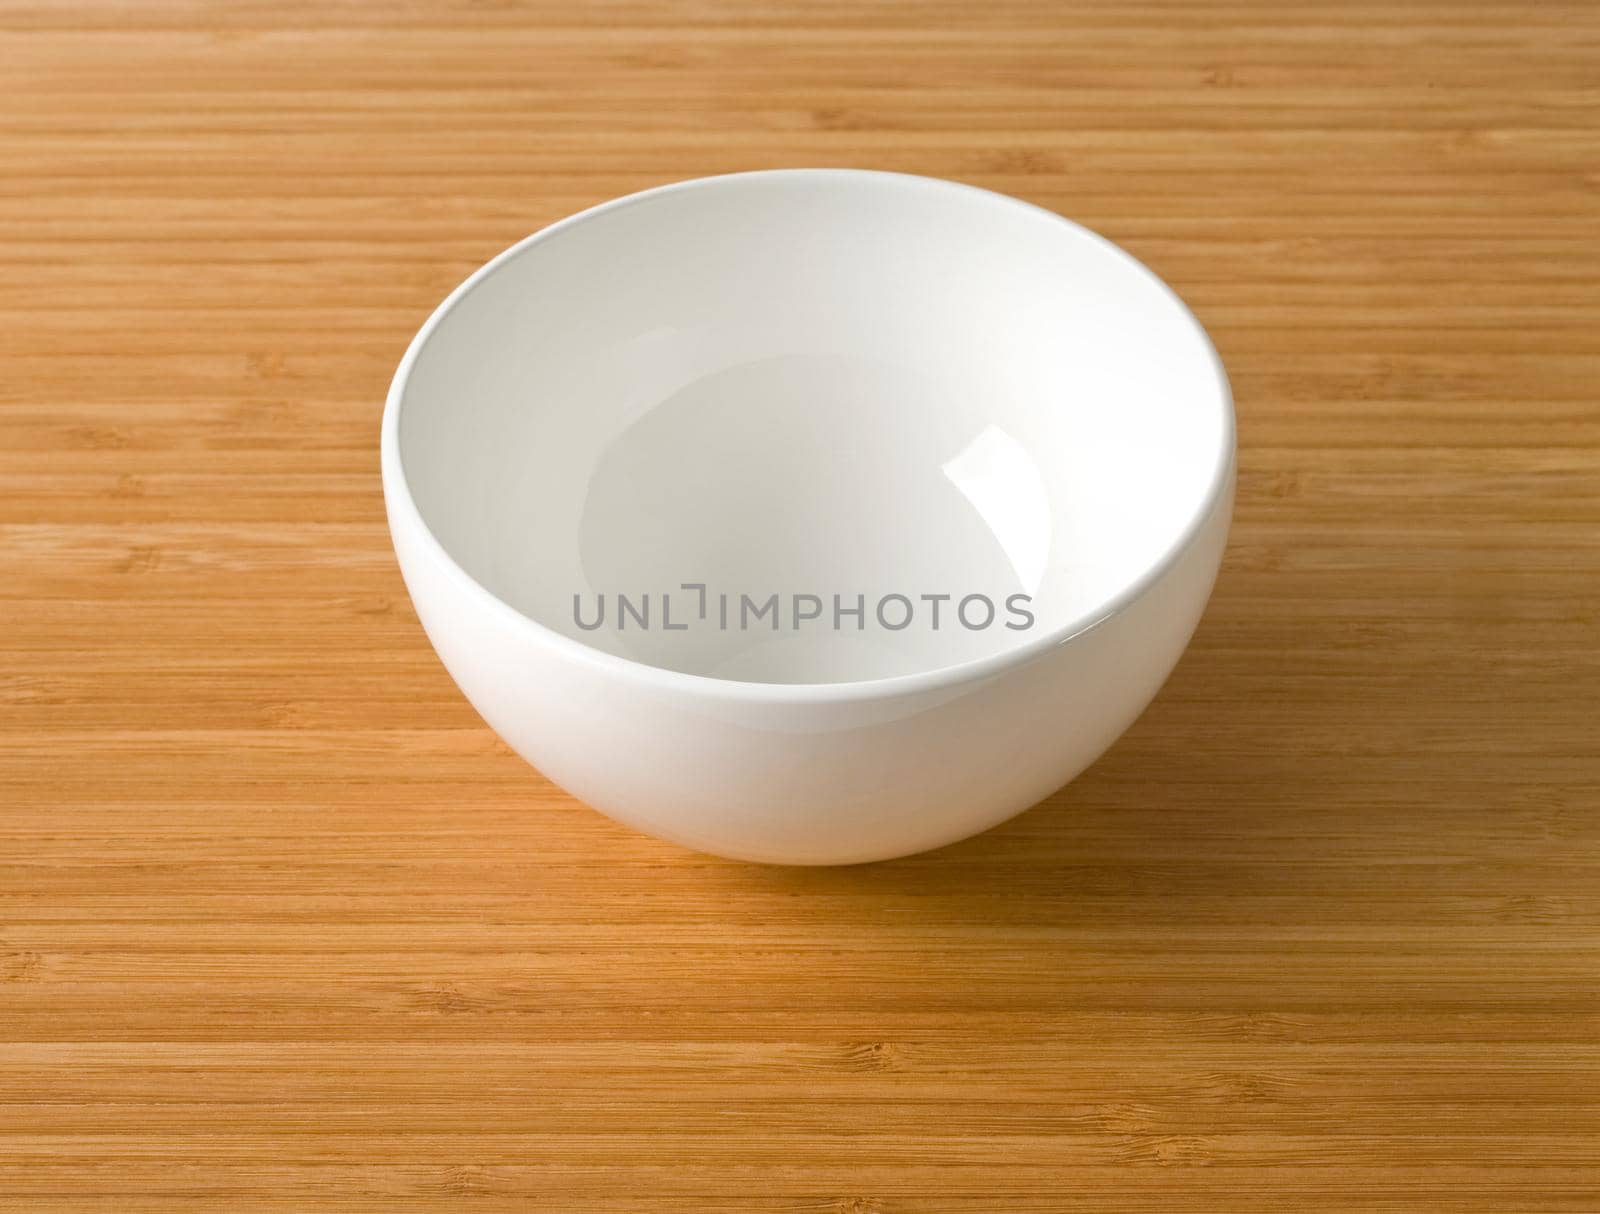 white empty bowl on a bamboo table top